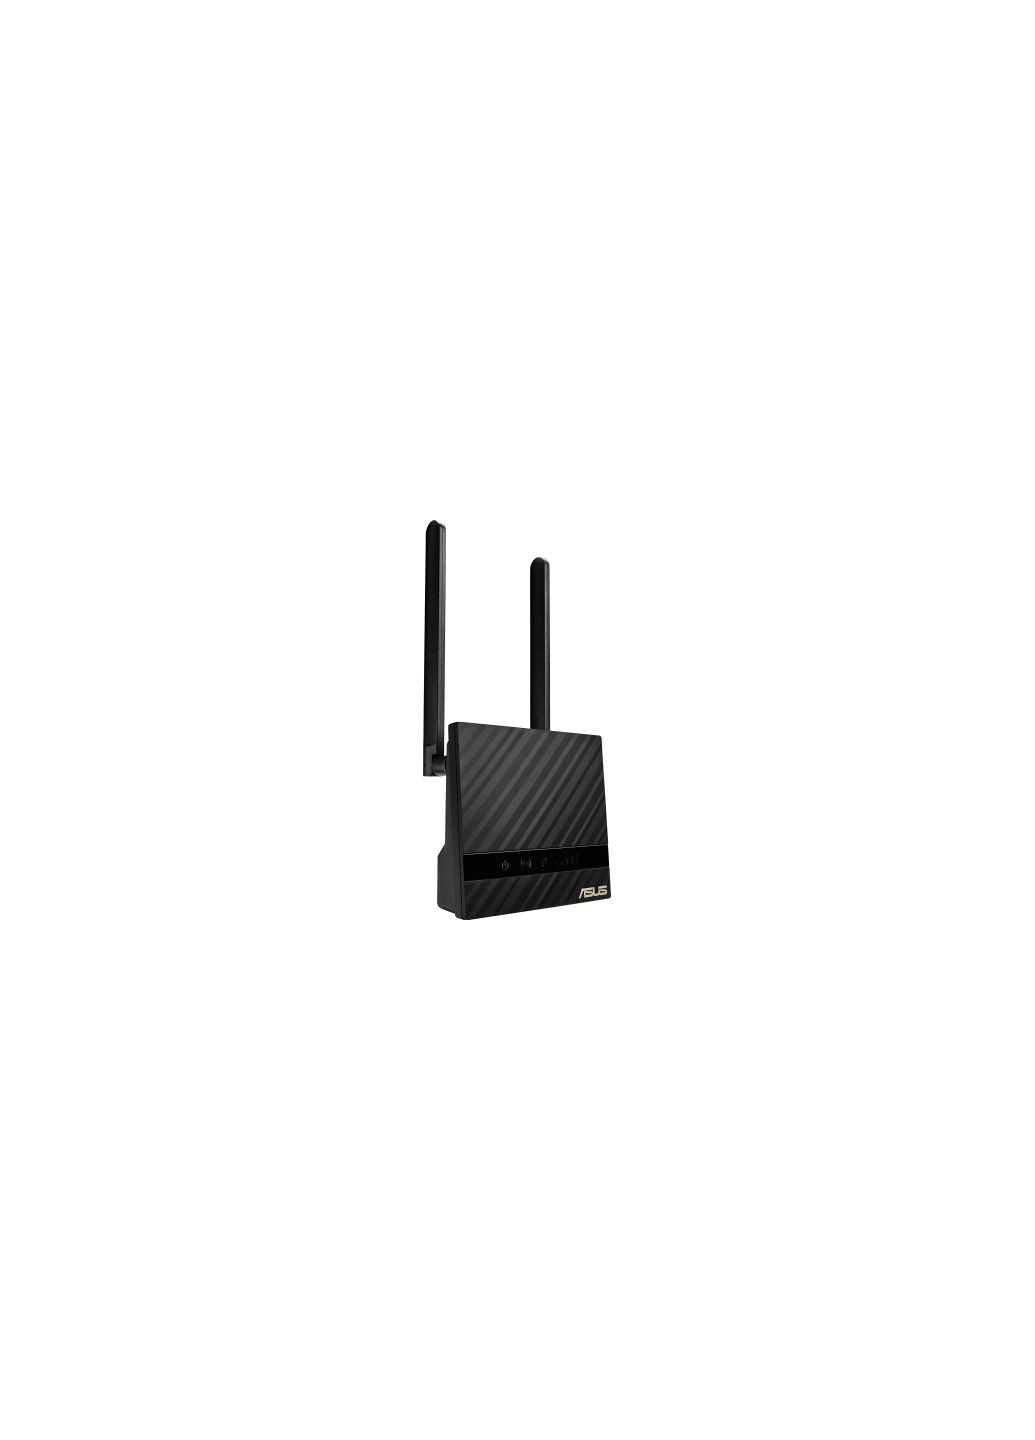 Маршрутизатор 4GN16 Asus 4g-n16 (278312378)